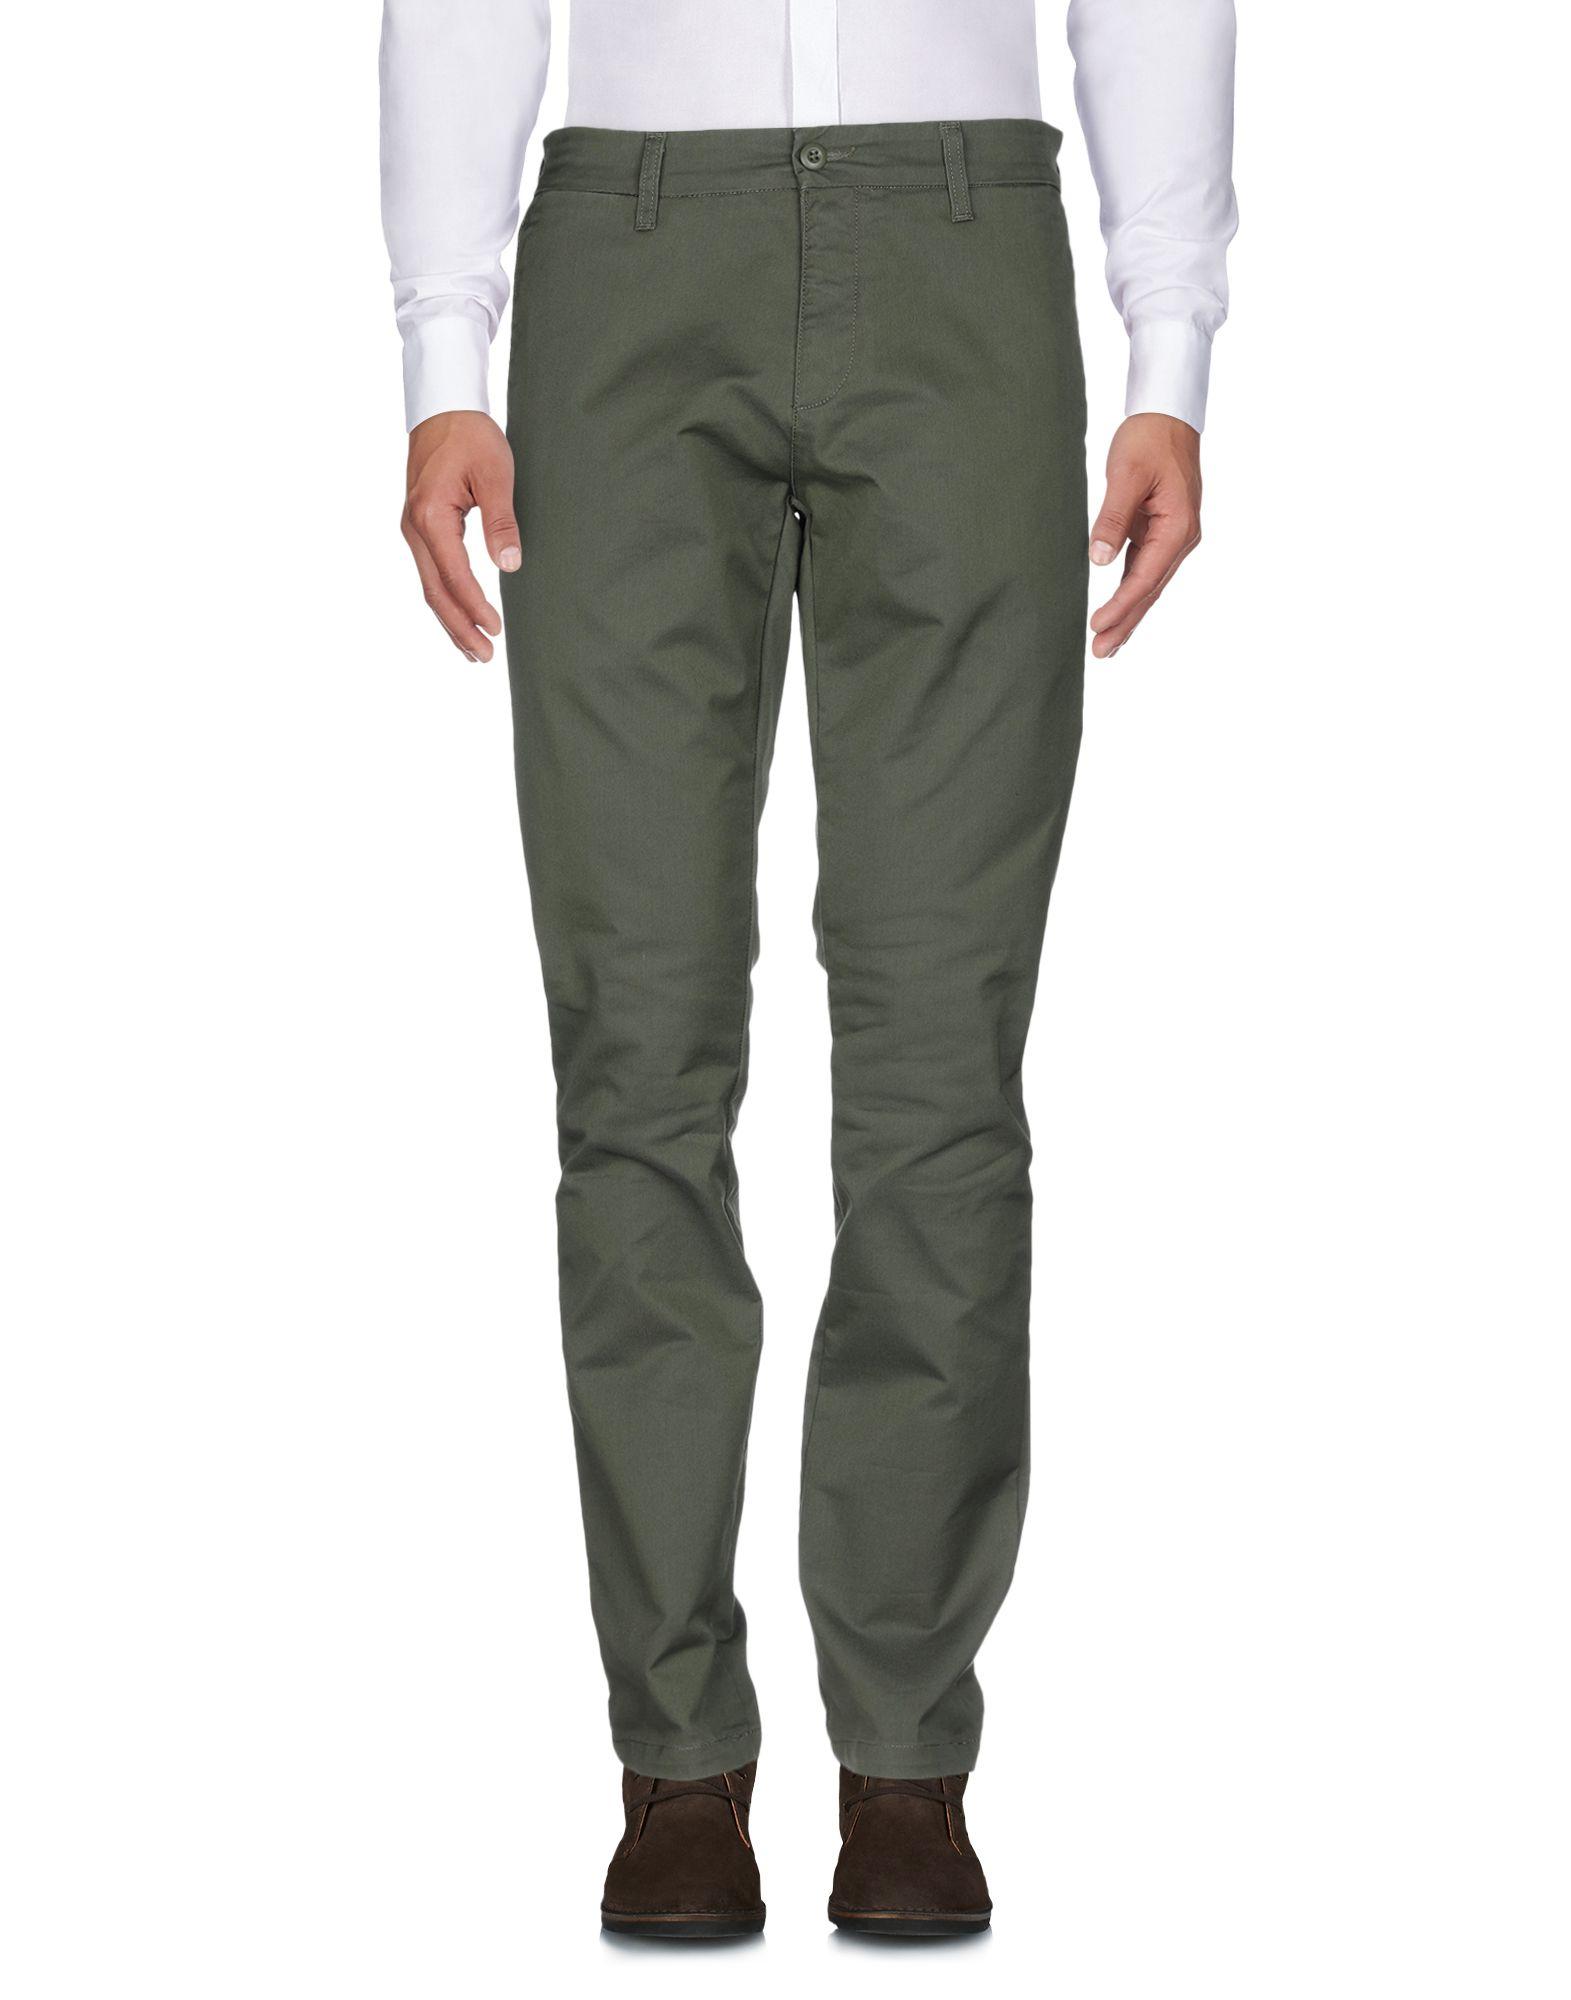 Carhartt Cotton Casual Pants in Military Green (Green) for Men - Lyst